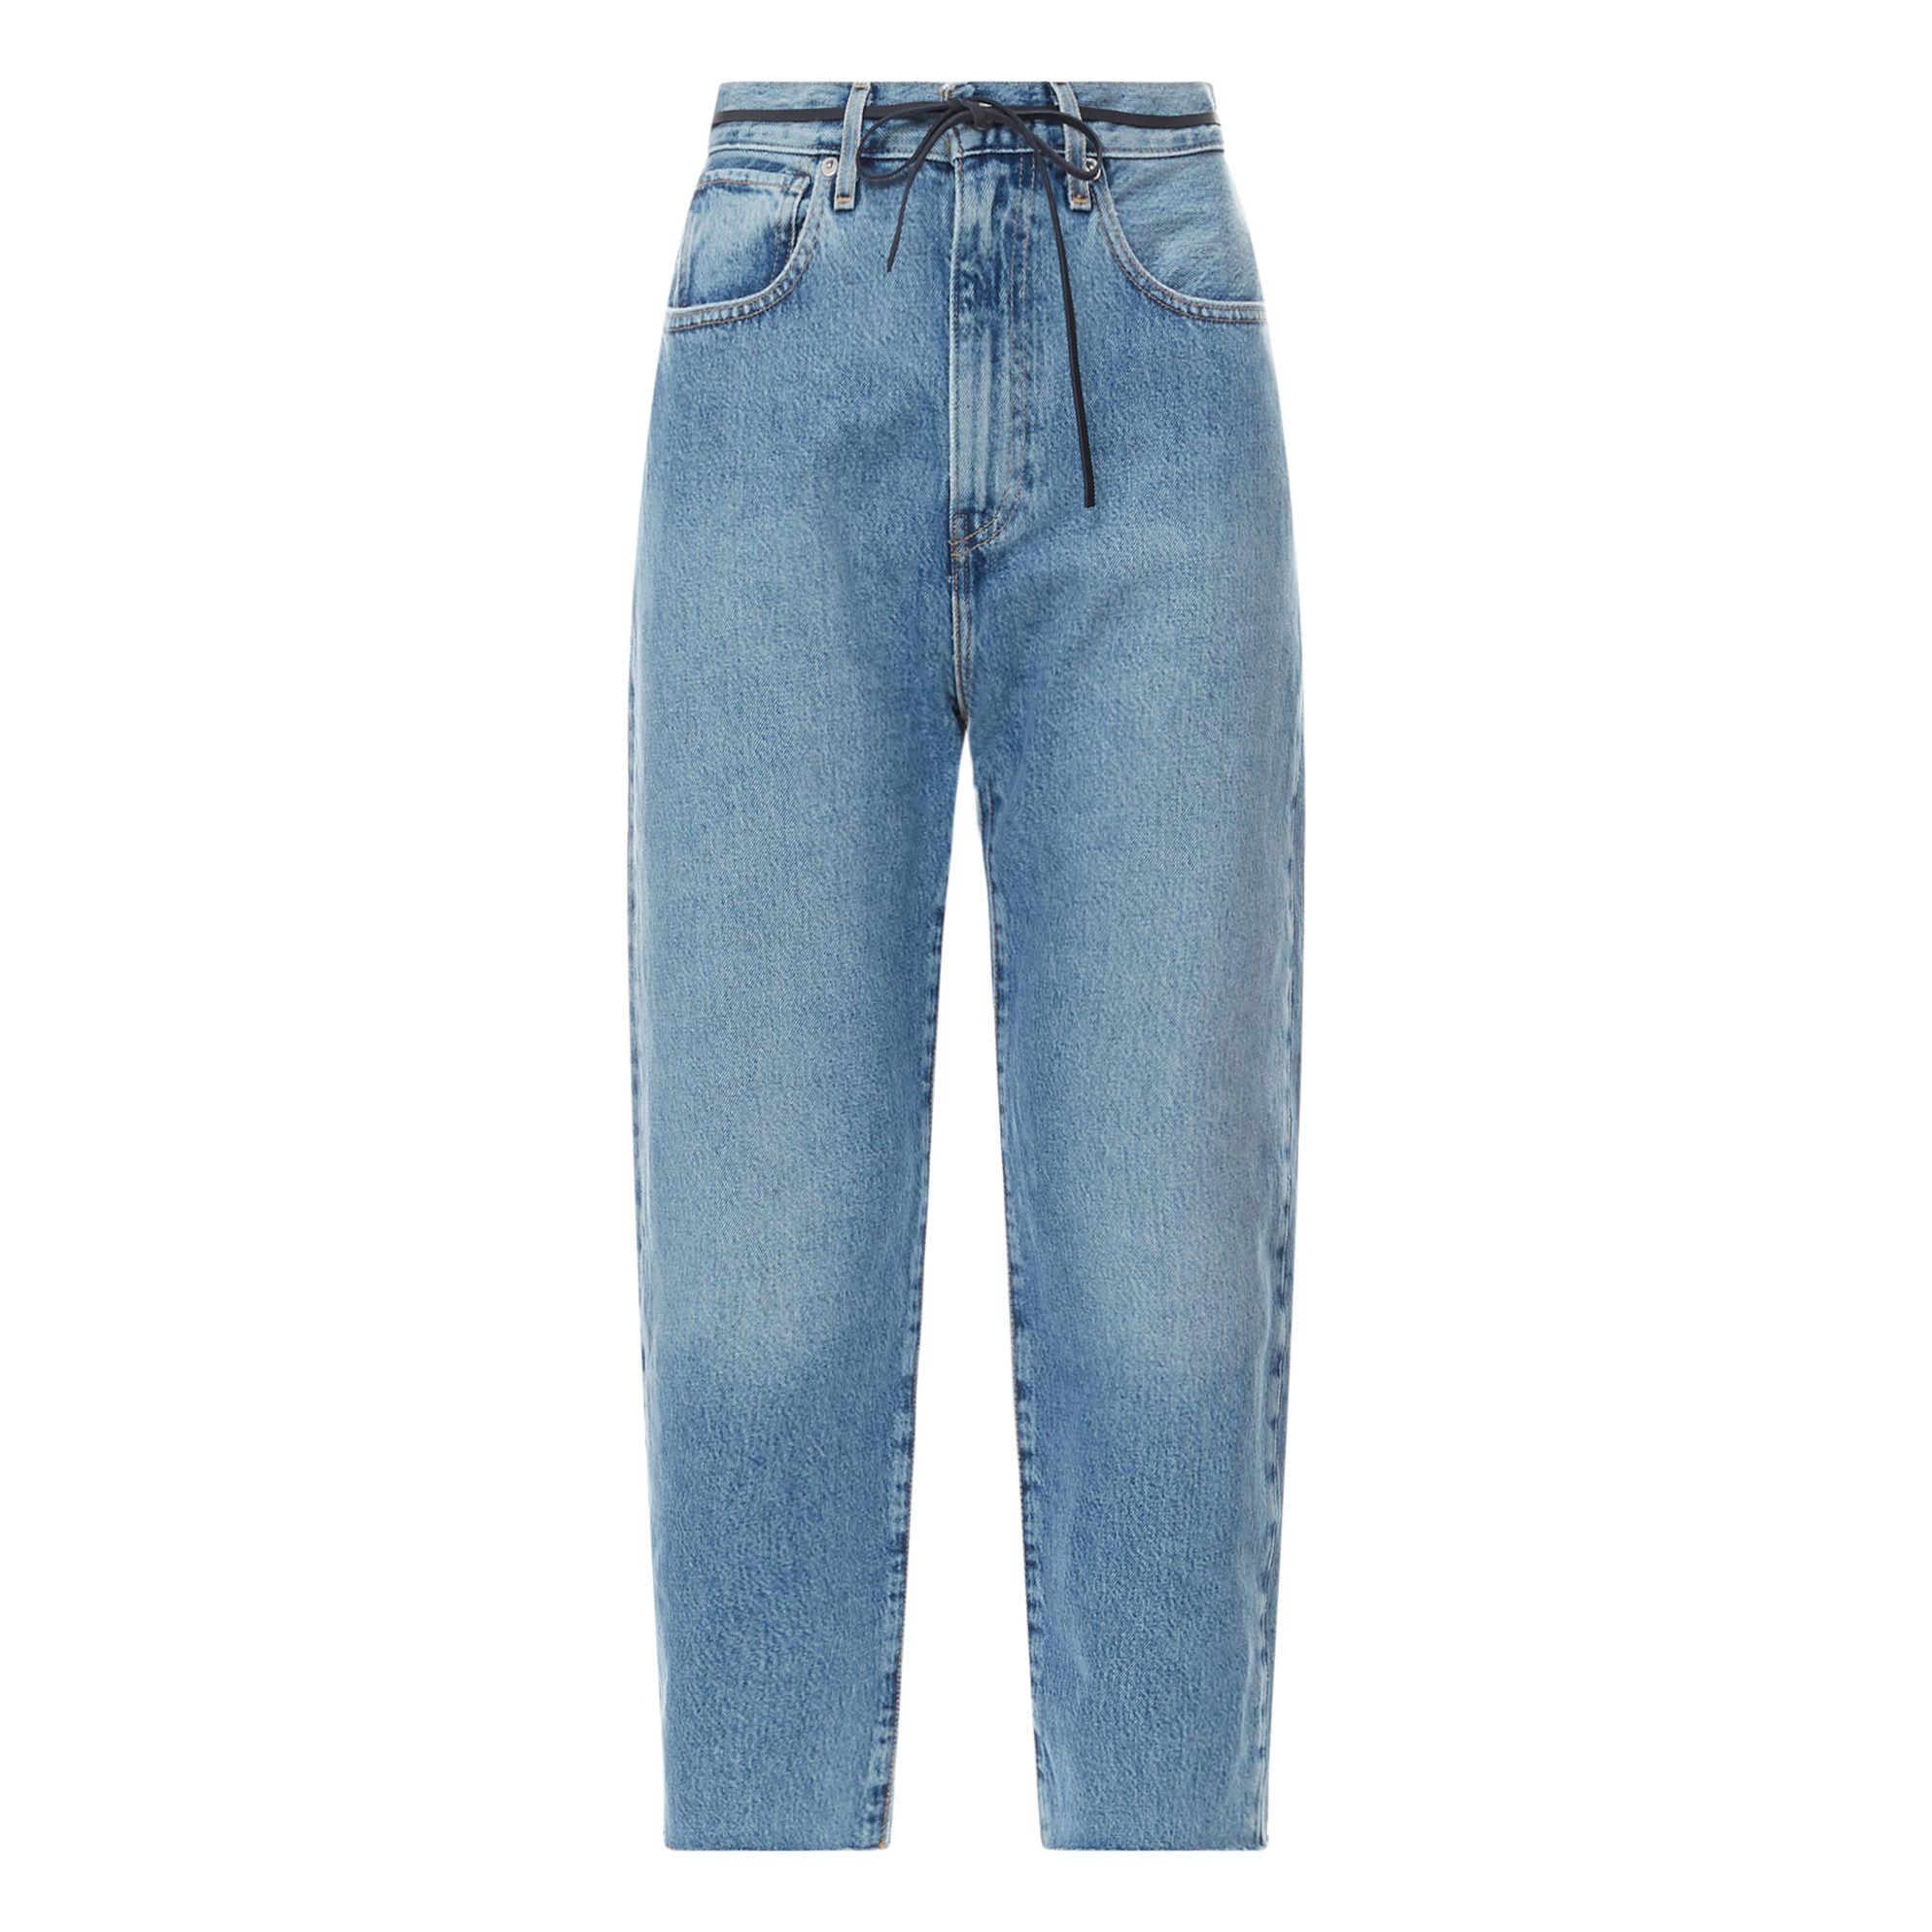 Barrel Jeans Palm Blues Levi's Made & Crafted Fashion Adult